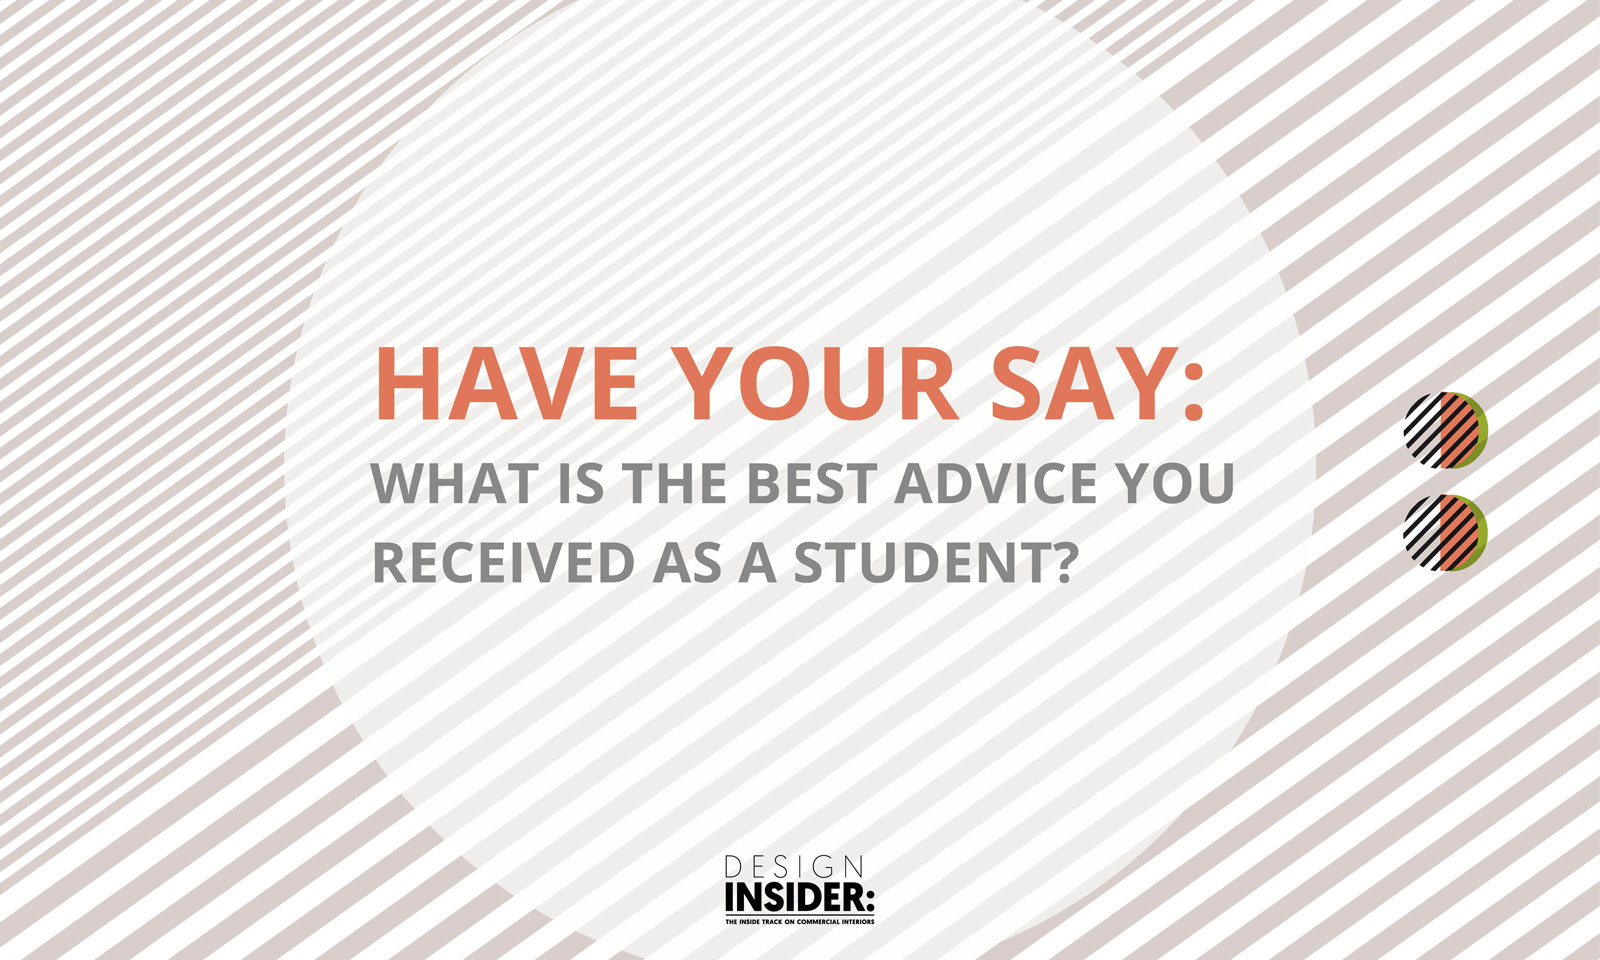 Have Your Say: What is the best advice you received as a student?